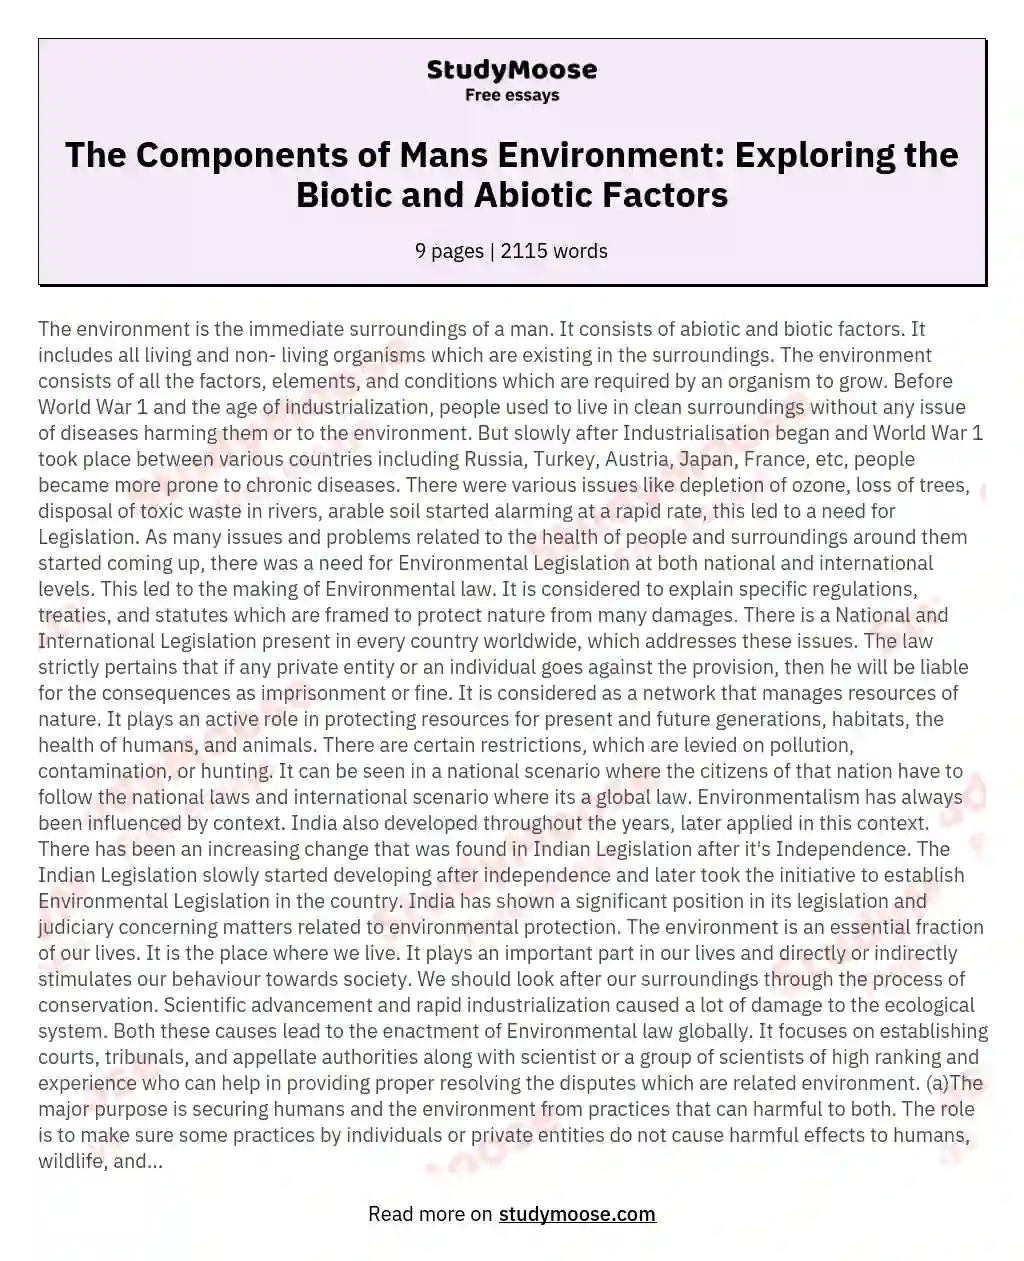 The Components of Mans Environment: Exploring the Biotic and Abiotic Factors essay